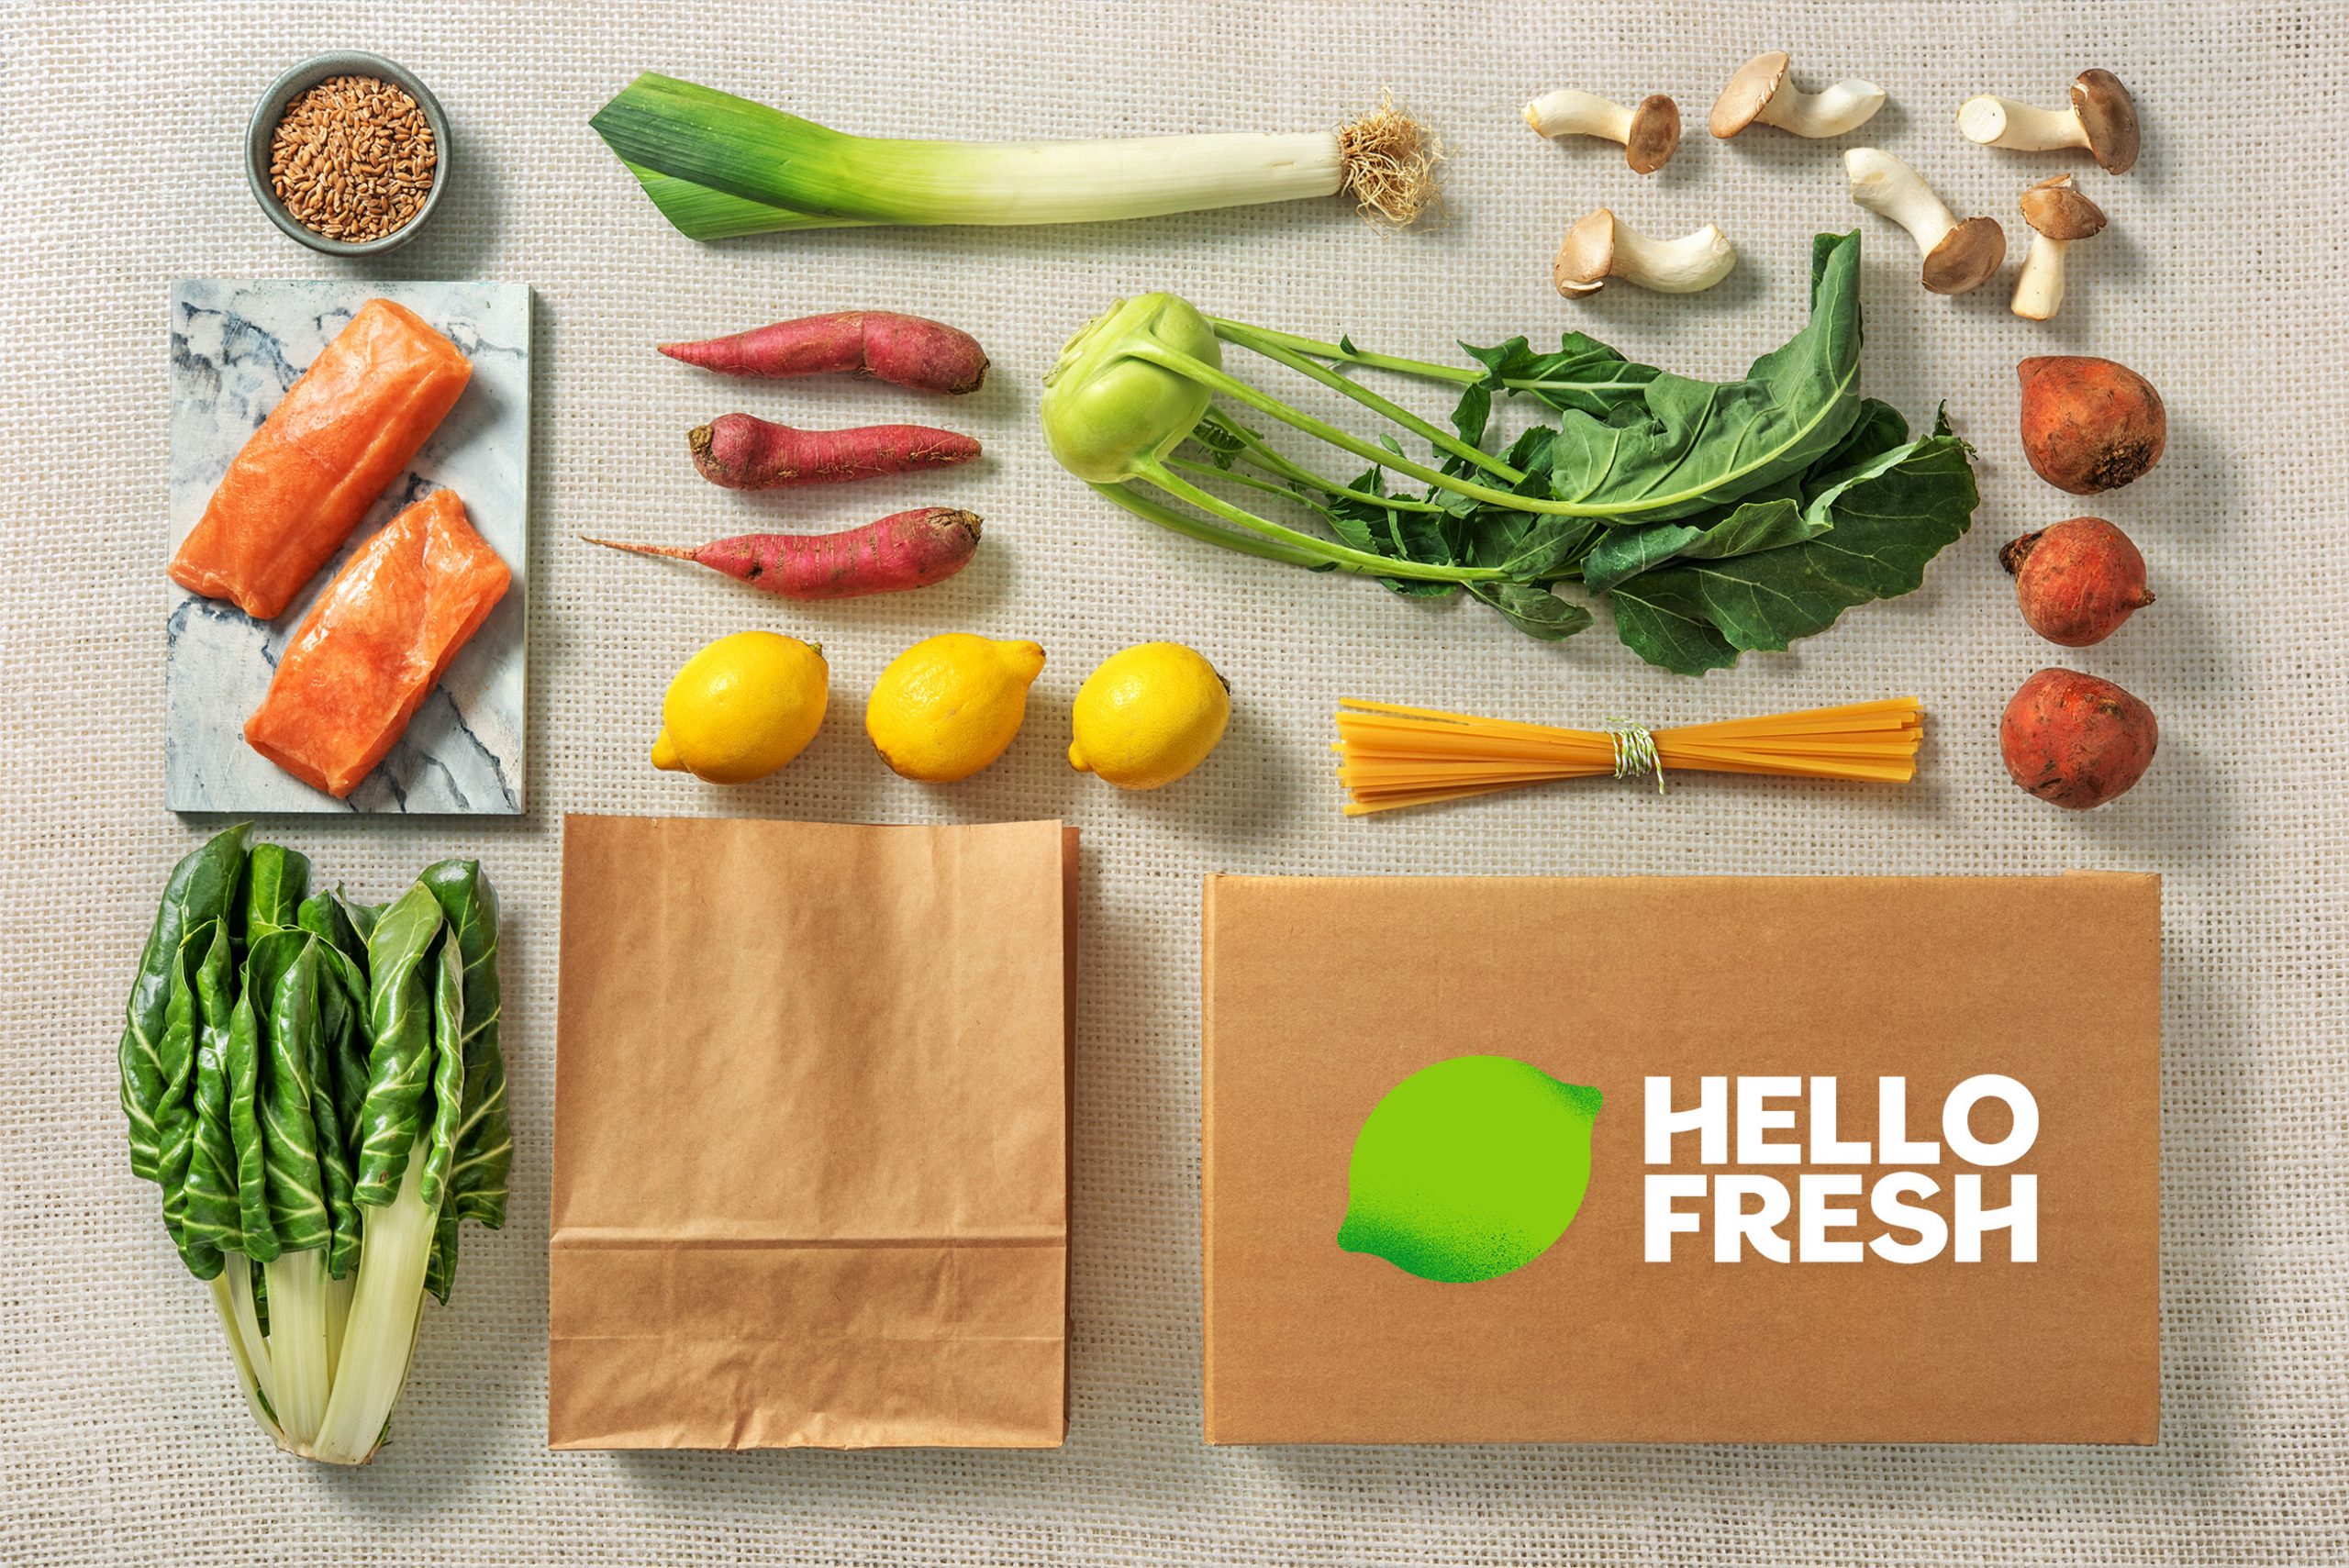 How HelloFresh became carbon neutral - New Food Magazine